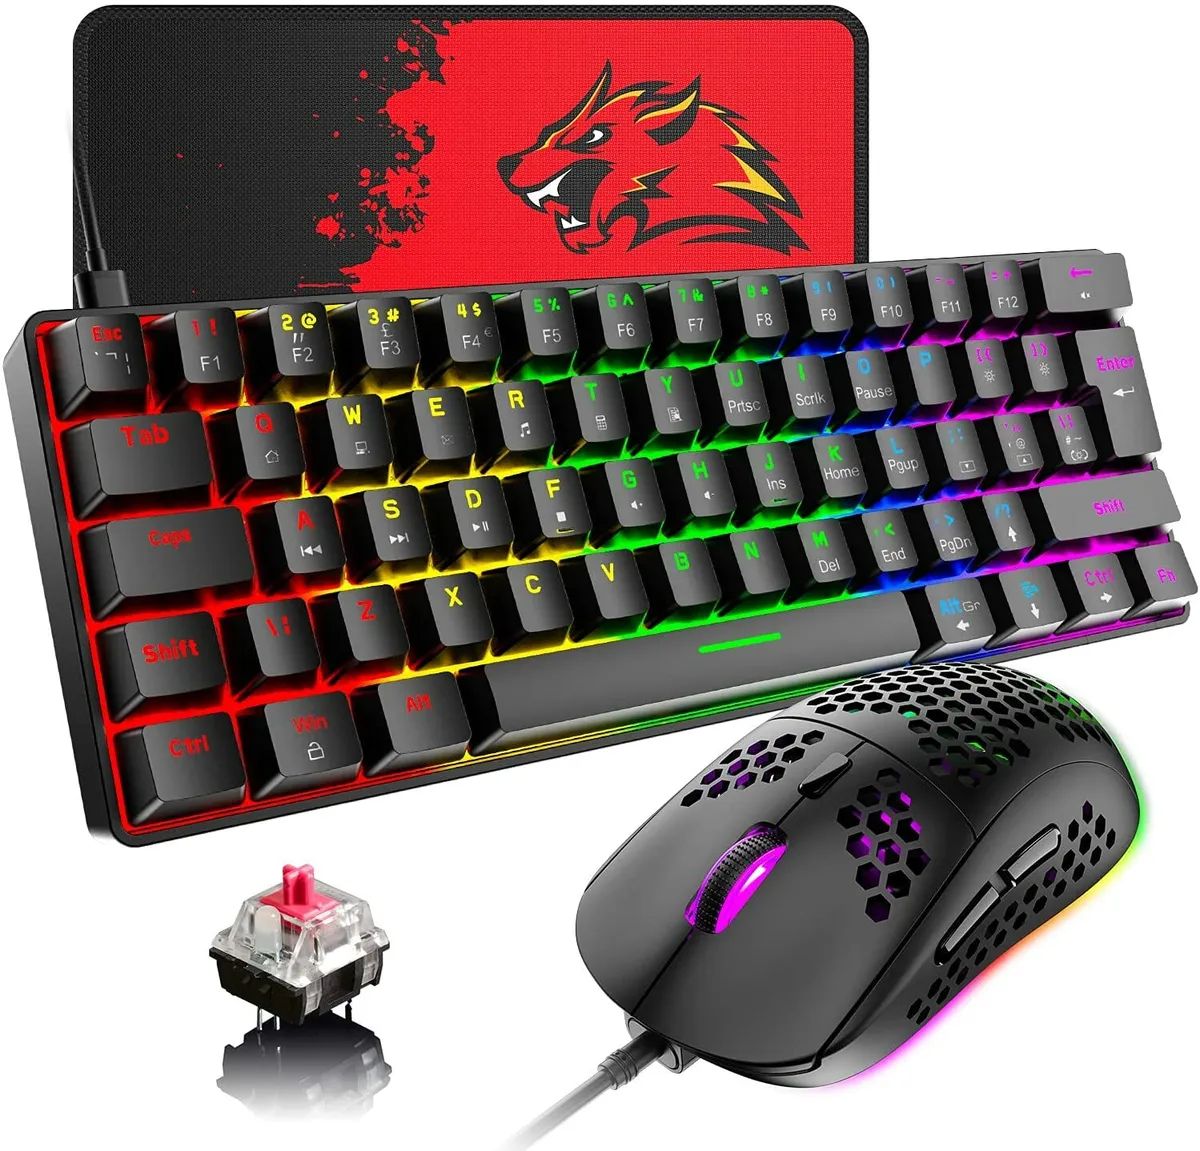 What Is The Best Gaming Mouse And Keyboard?